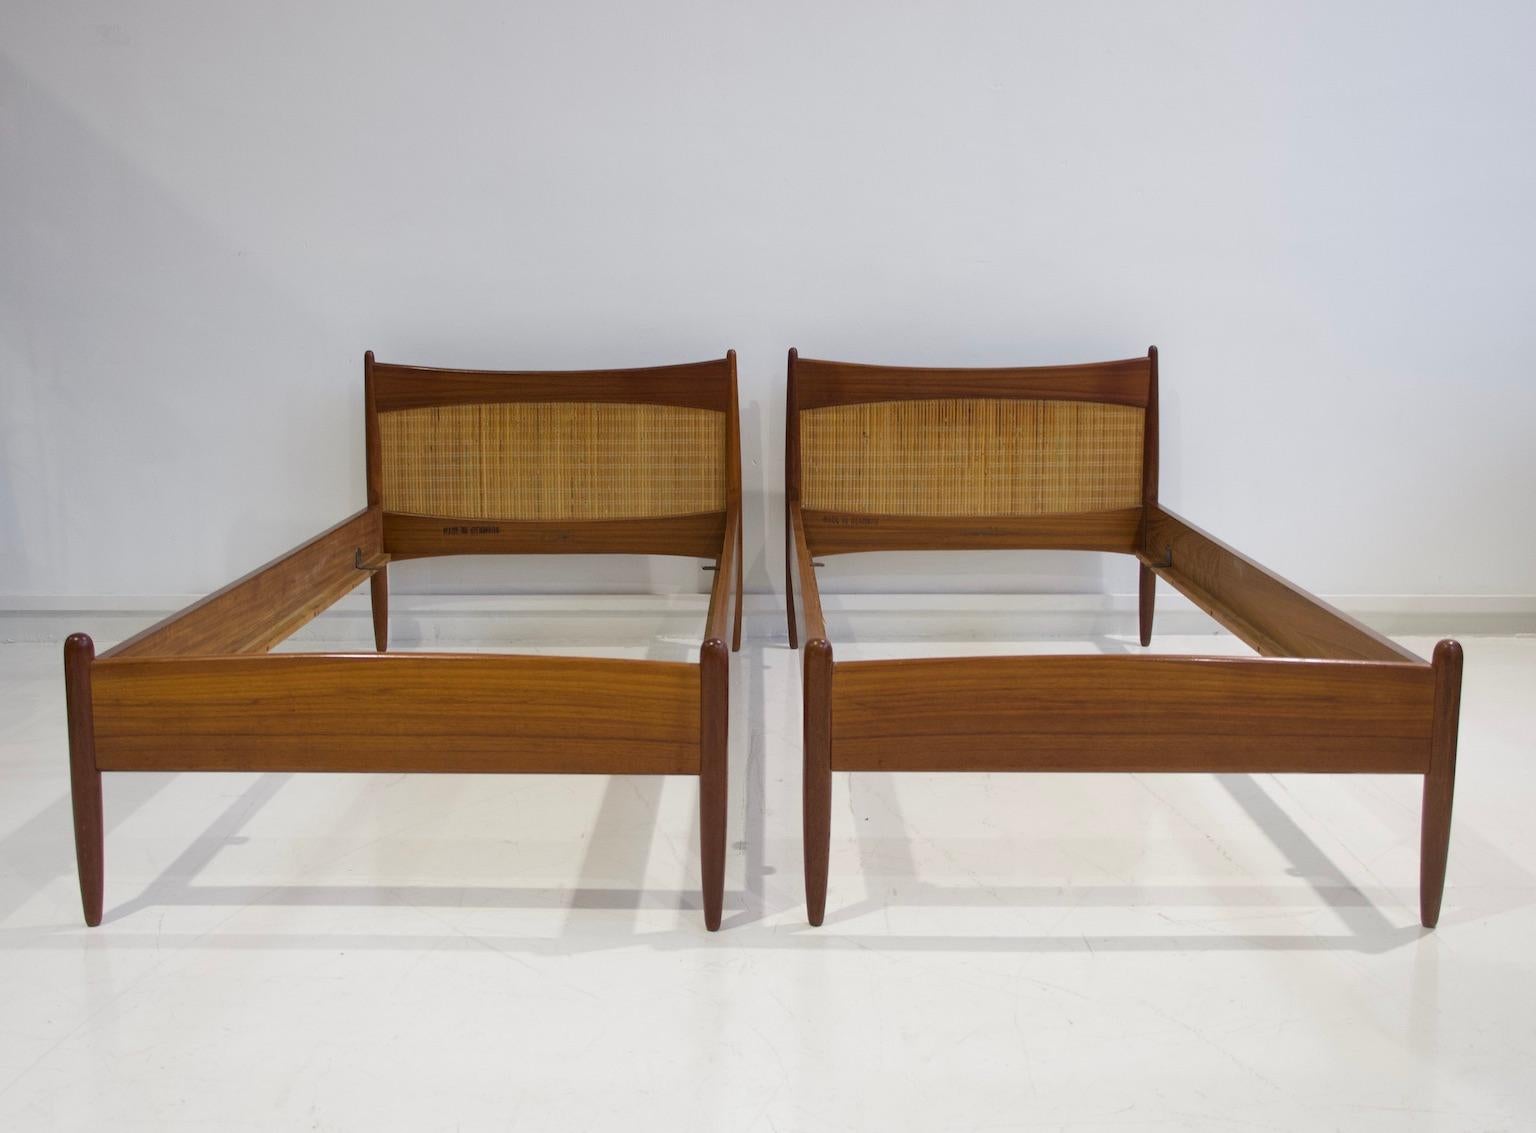 Pair of teak wood bed frames with rattan headboard from the 1950s. Designed by Børge Mogensen and manufactured in Denmark. Stamped by maker. Easy to dismantle for shipping and then assemble. Beautiful pieces for guest or children bedrooms. Please